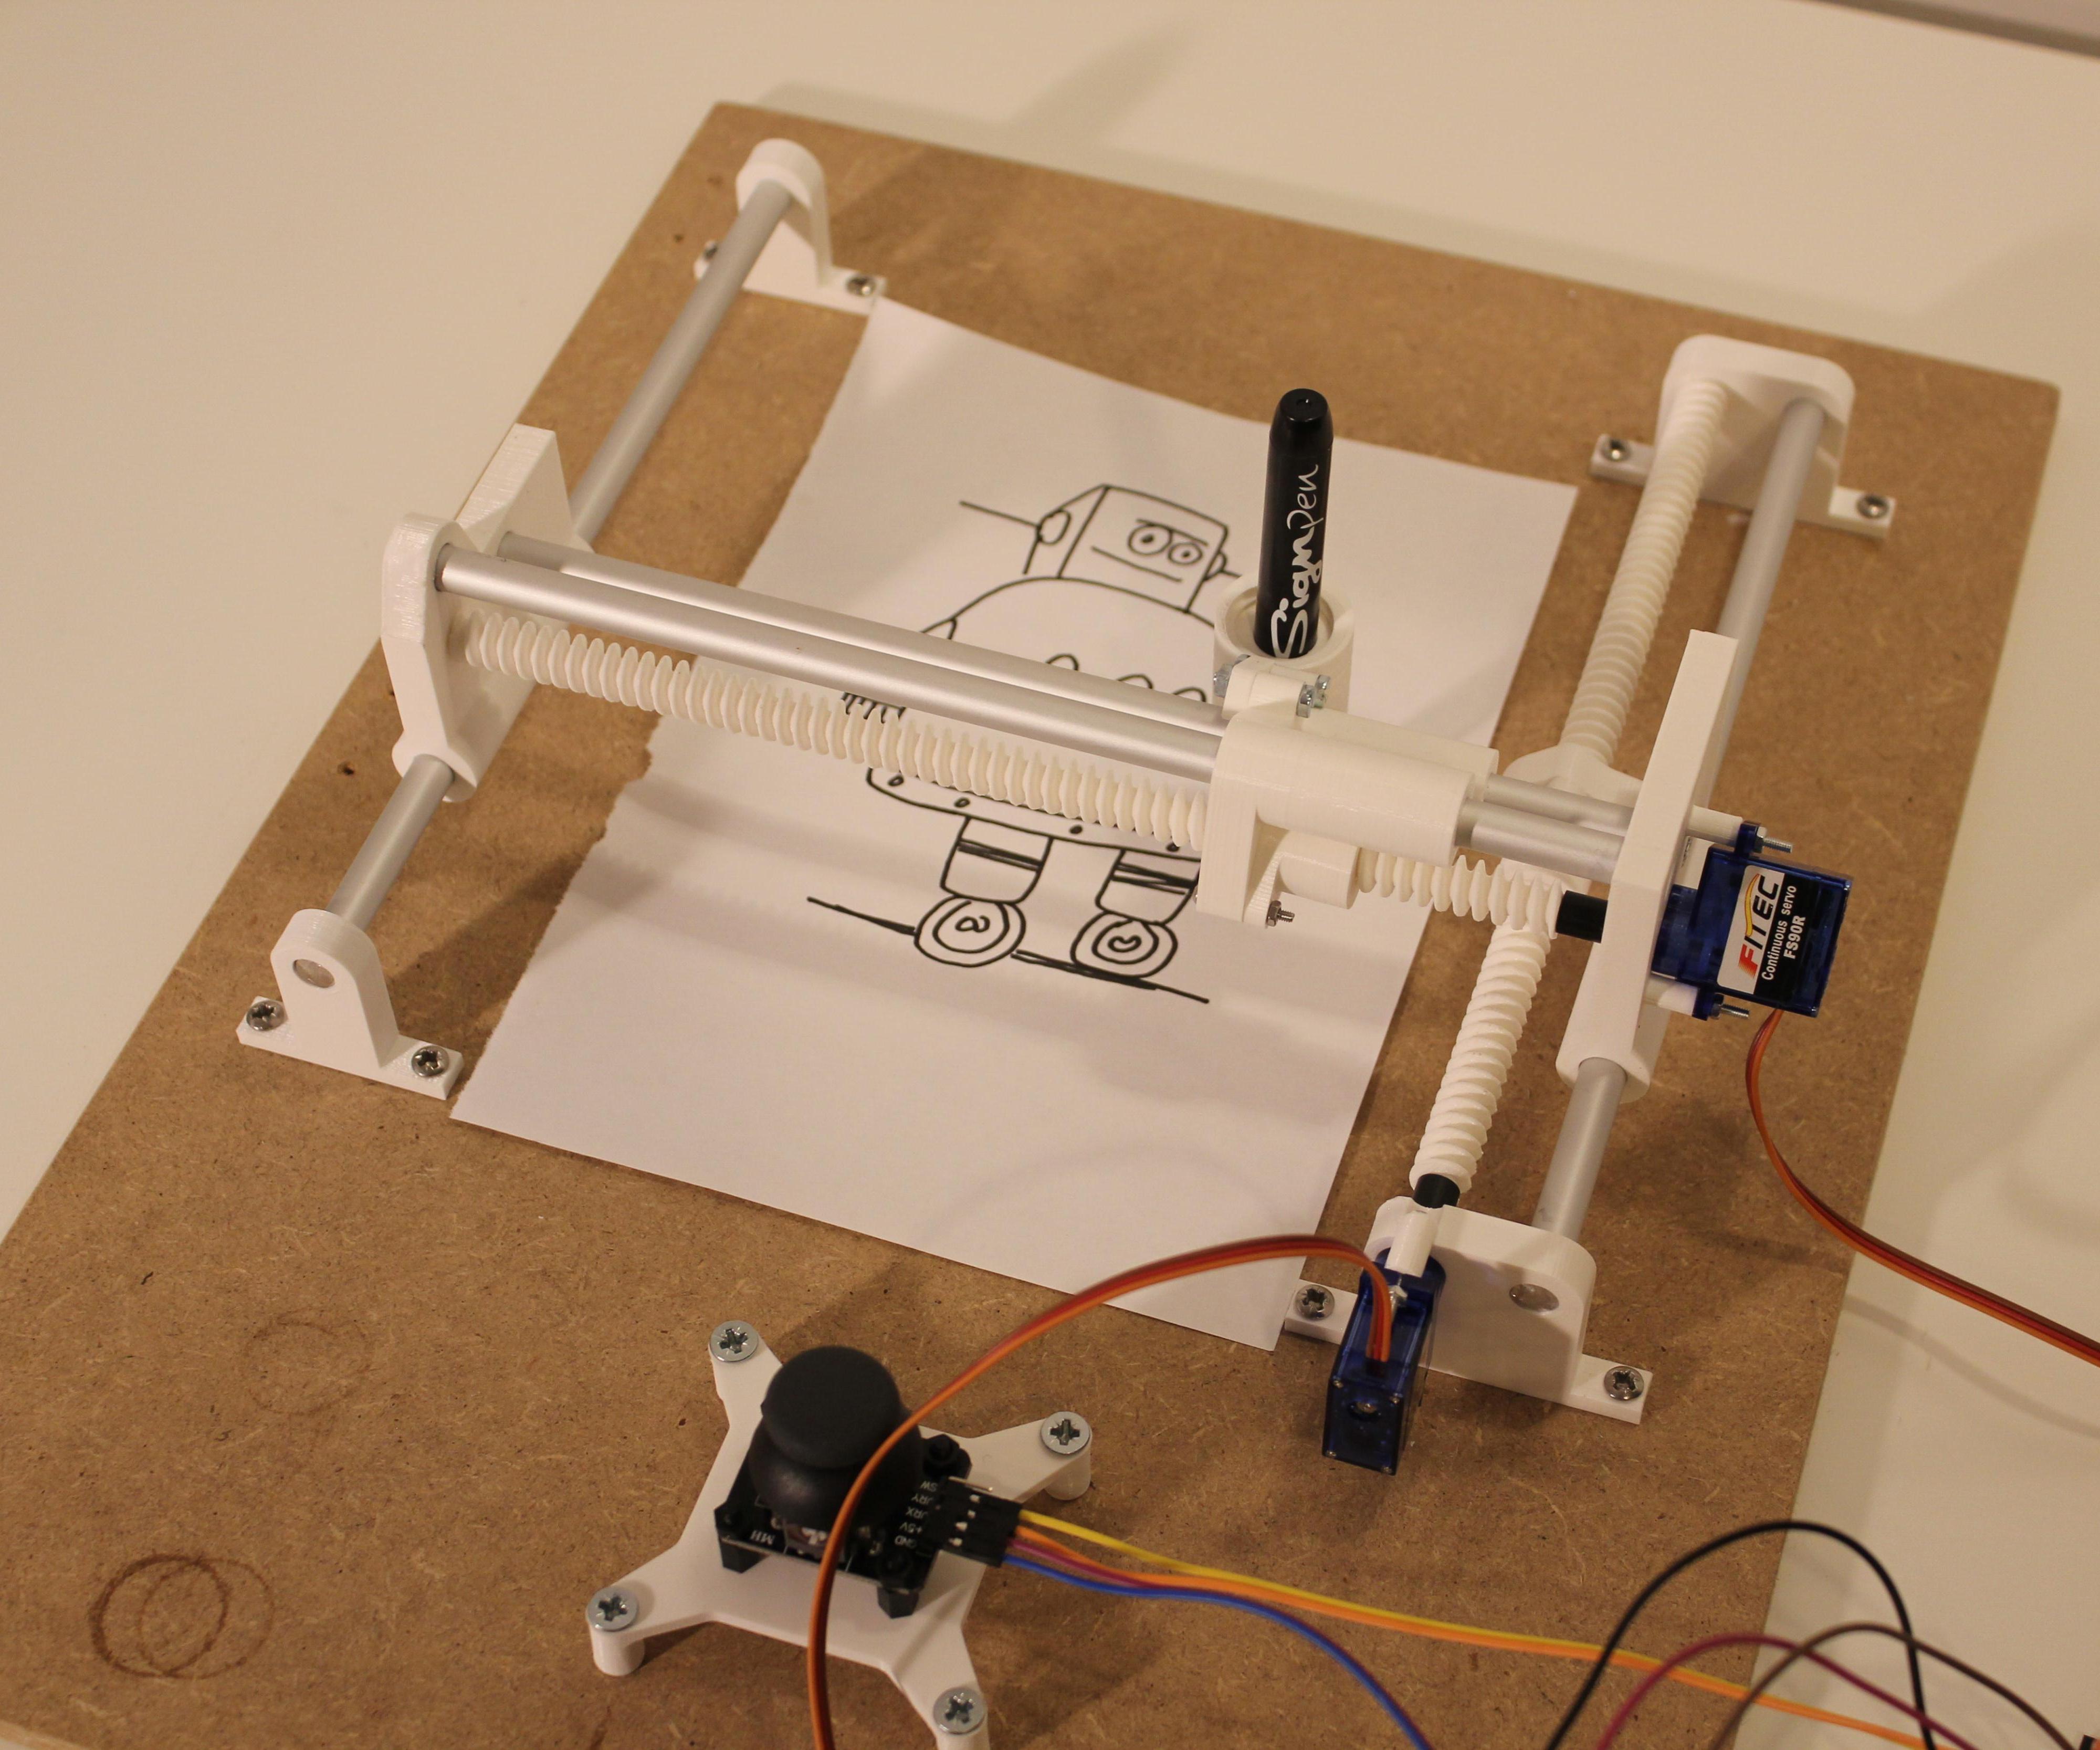 Almost Entirely 3D-printed Pen Plotter